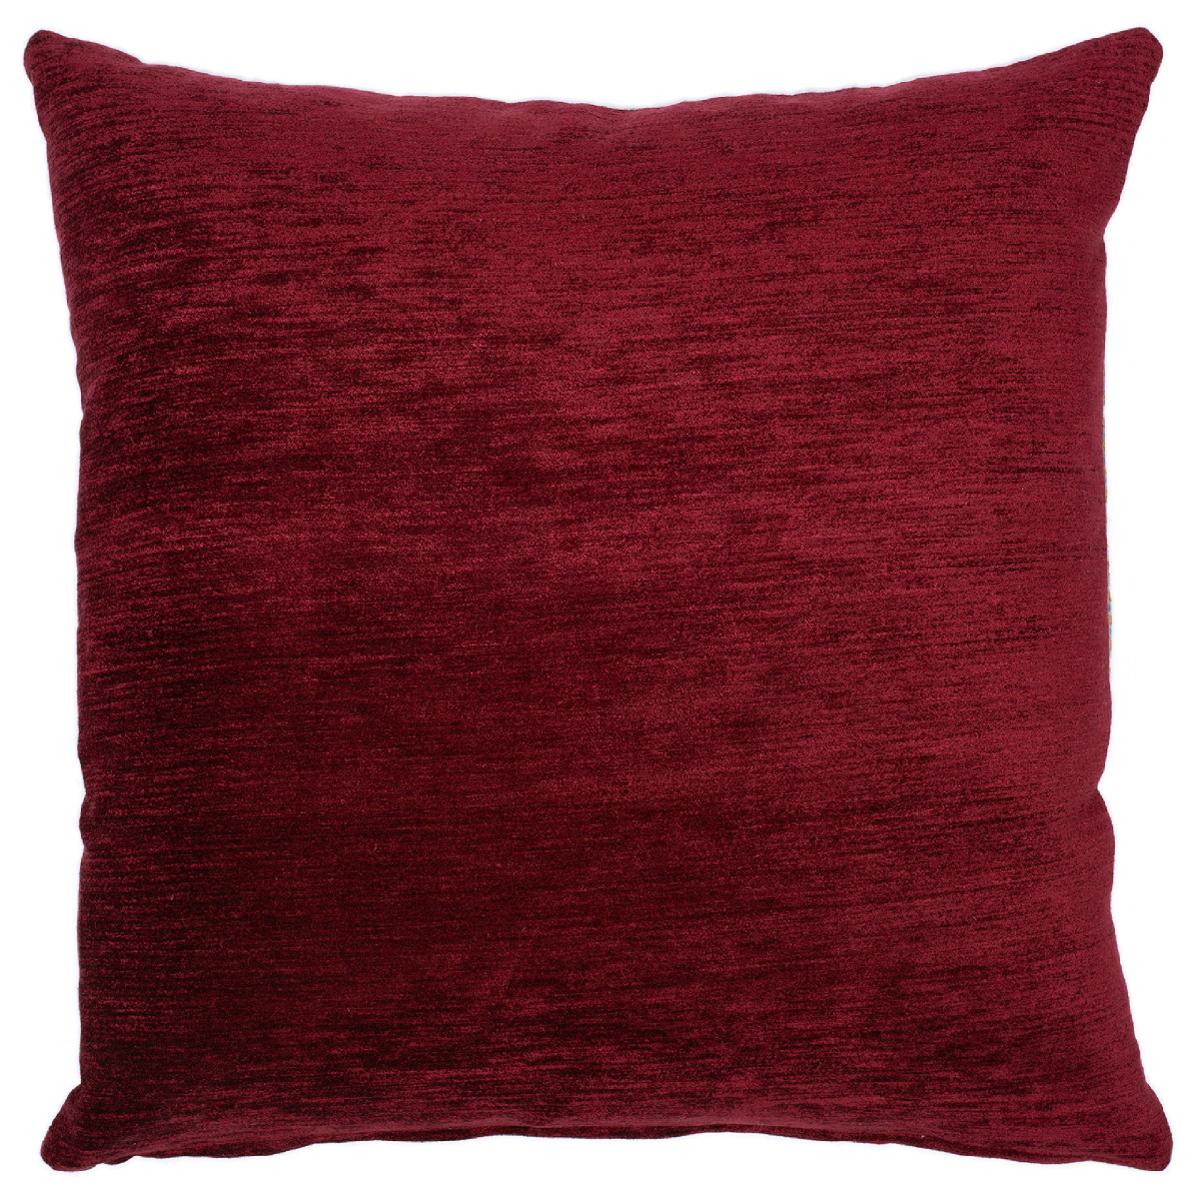 COLOUR: Red with gold fringe
FRONT MATERIAL: 76% Viscose, 11% Polyester, 13% Cotton Jacquard woven fabric
BACK MATERIAL: Chenille 
FILLER: Feather
STOCK SIZE: 60cm x 60cm (approx)
ORIGIN: Fabric produced in Turkey, cushions made in the UK

Here at